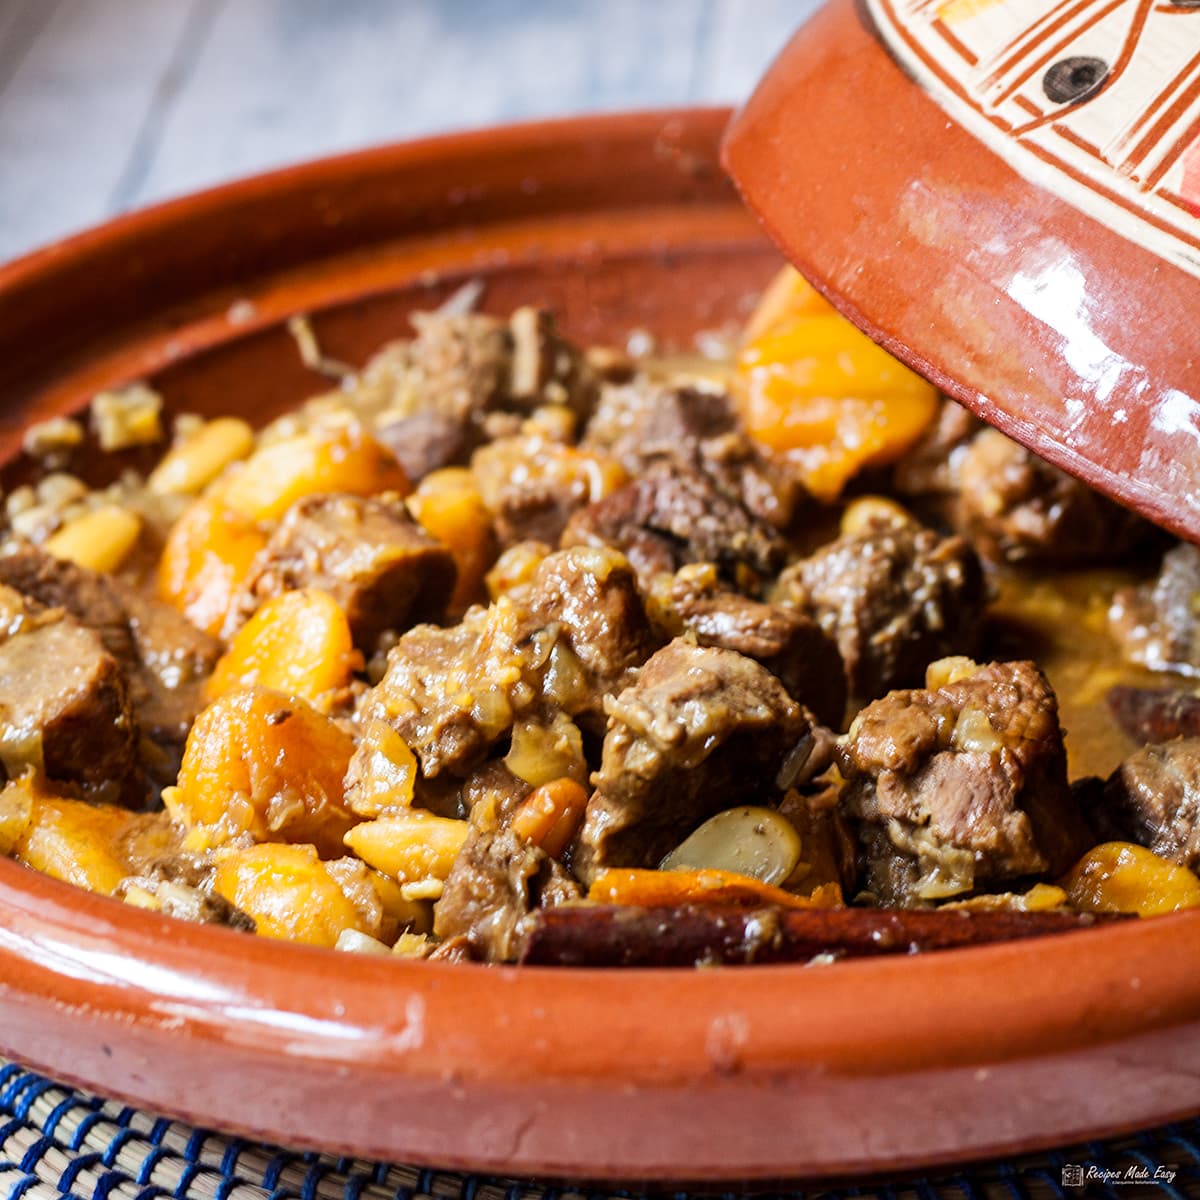 Easy Lamb tagine in traditional dish with lid part covering.